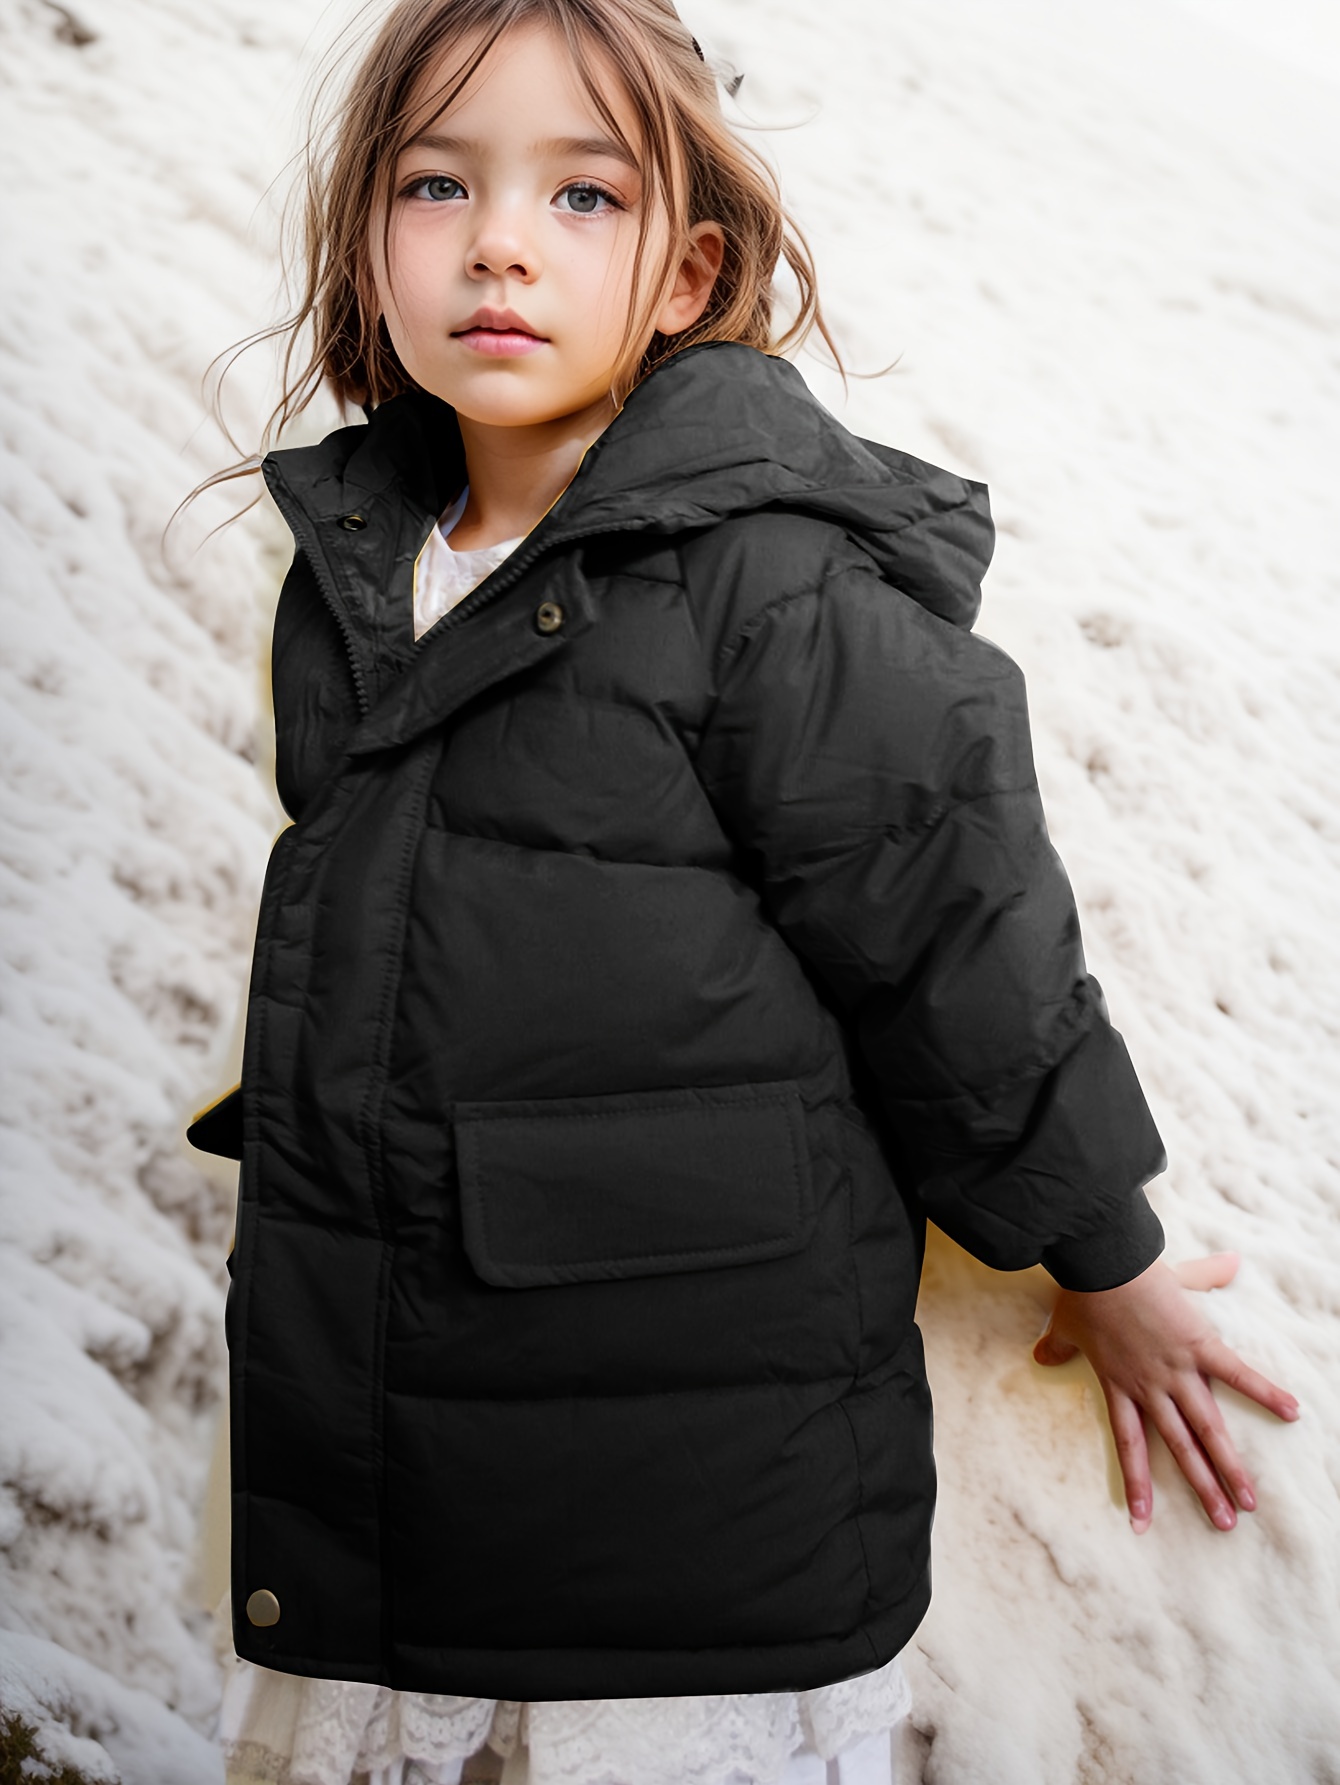 Cheap Fashion Children Winter Down Cotton Jacket Girl Clothes Kids Warm  Cotton Clothing for Teenage Girl